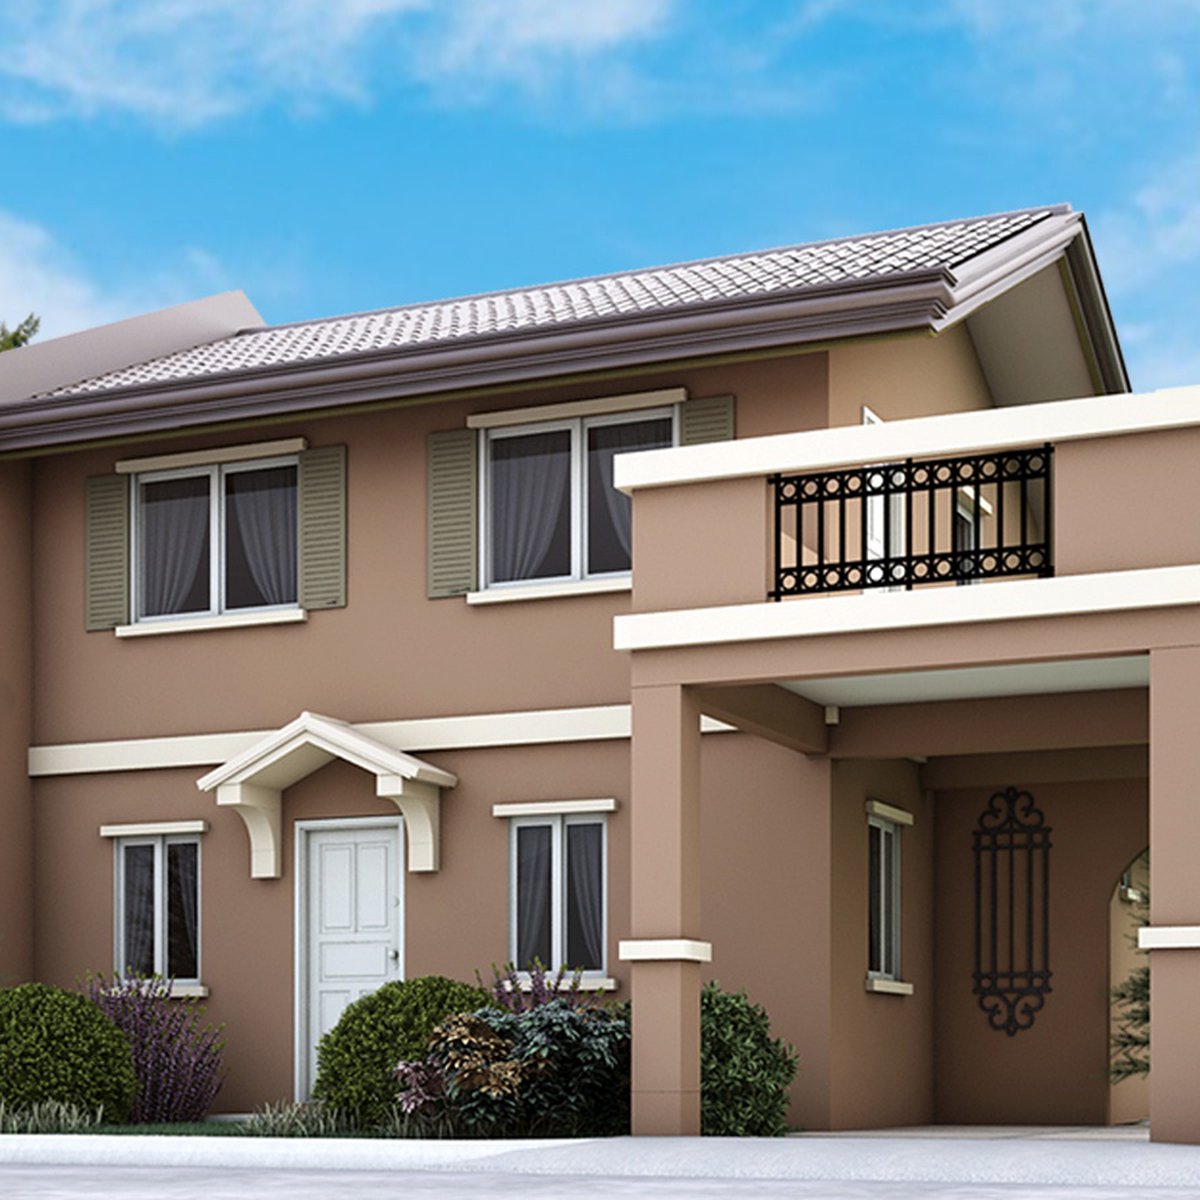 House and Lot for Sale in Gapan City -Ella 5-Bedroom Unit